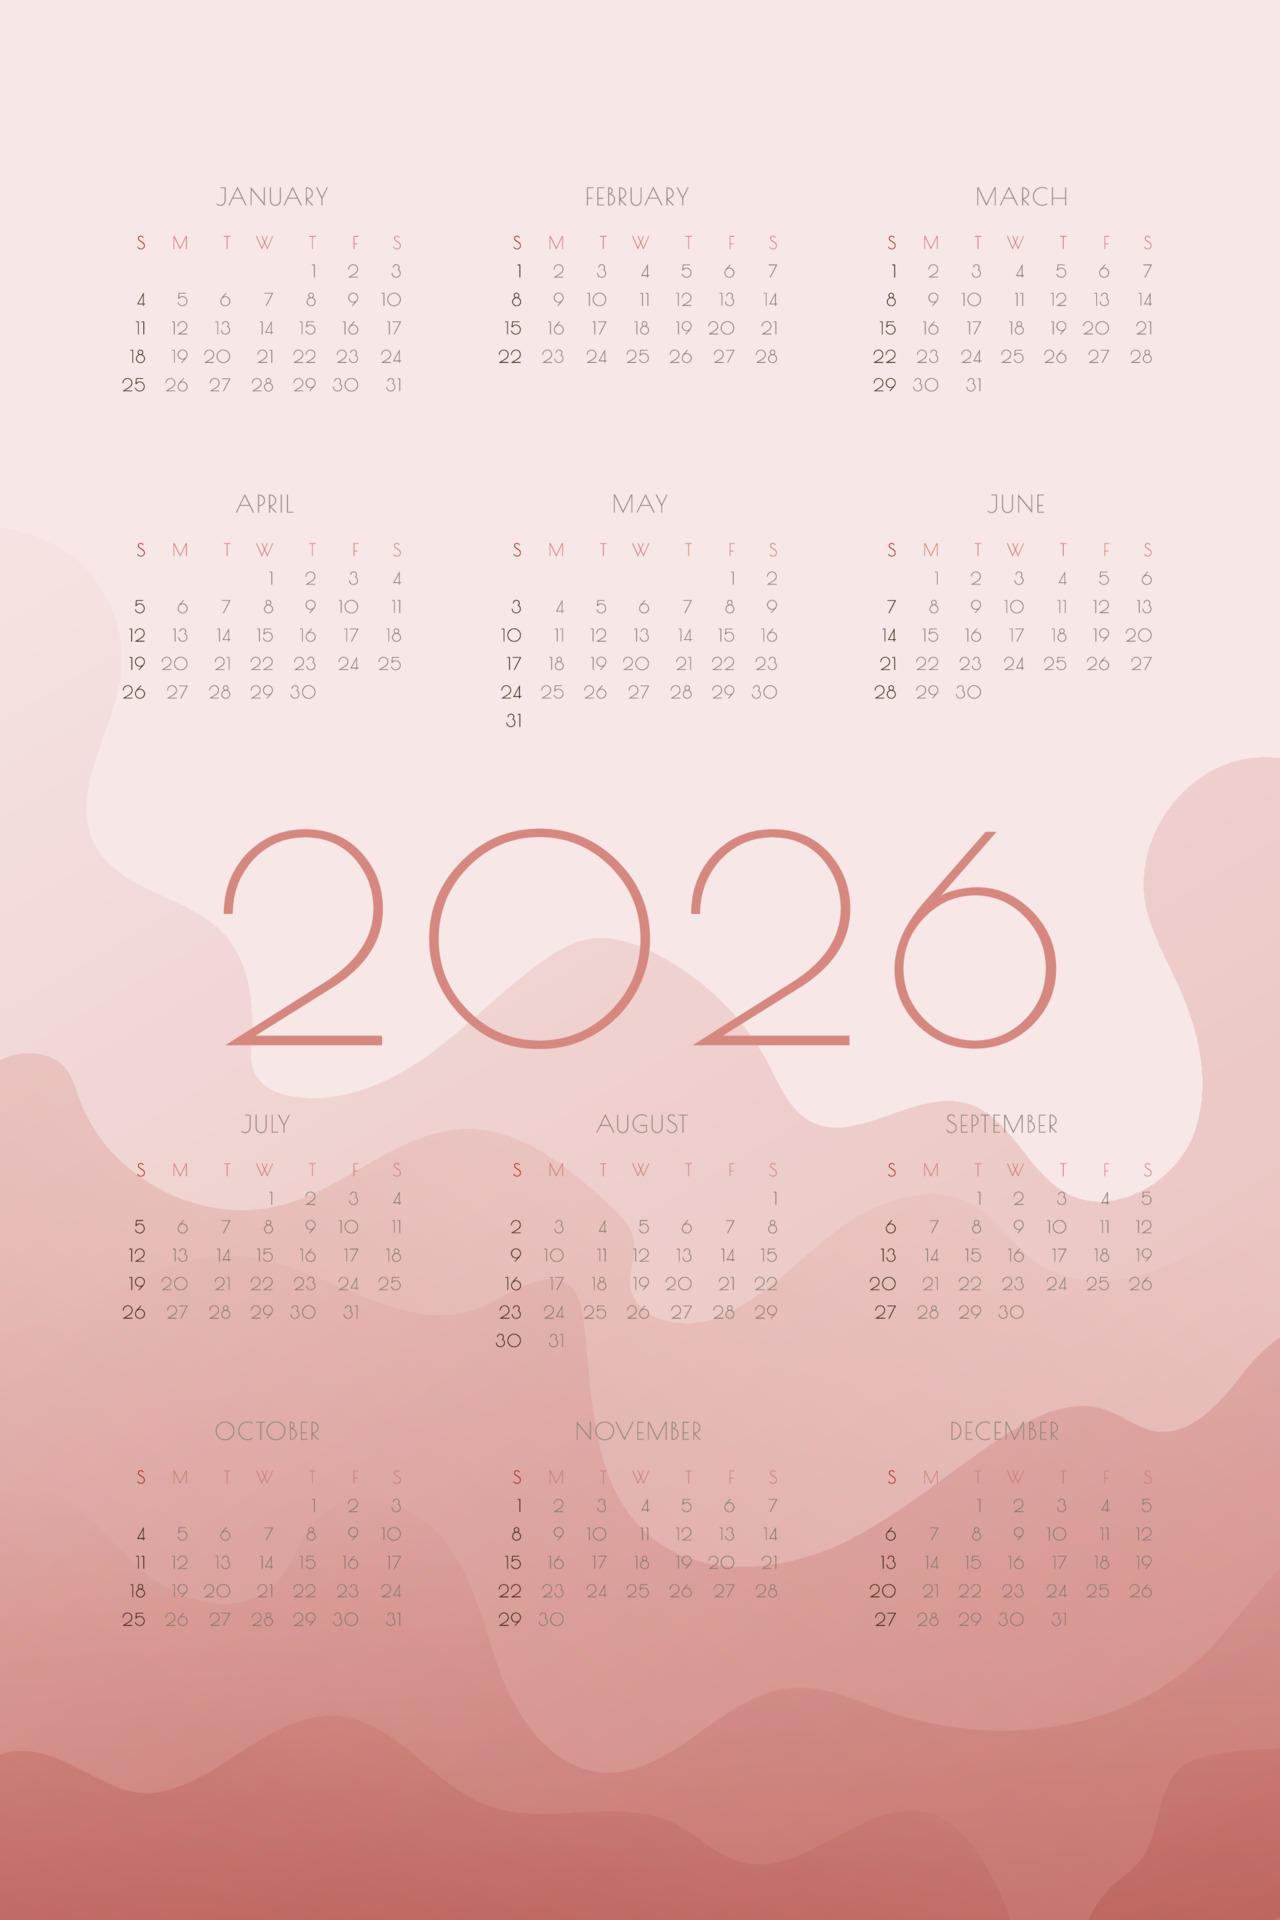 2026-calendar-with-red-gradient-shapes-4684554-vector-art-at-vecteezy